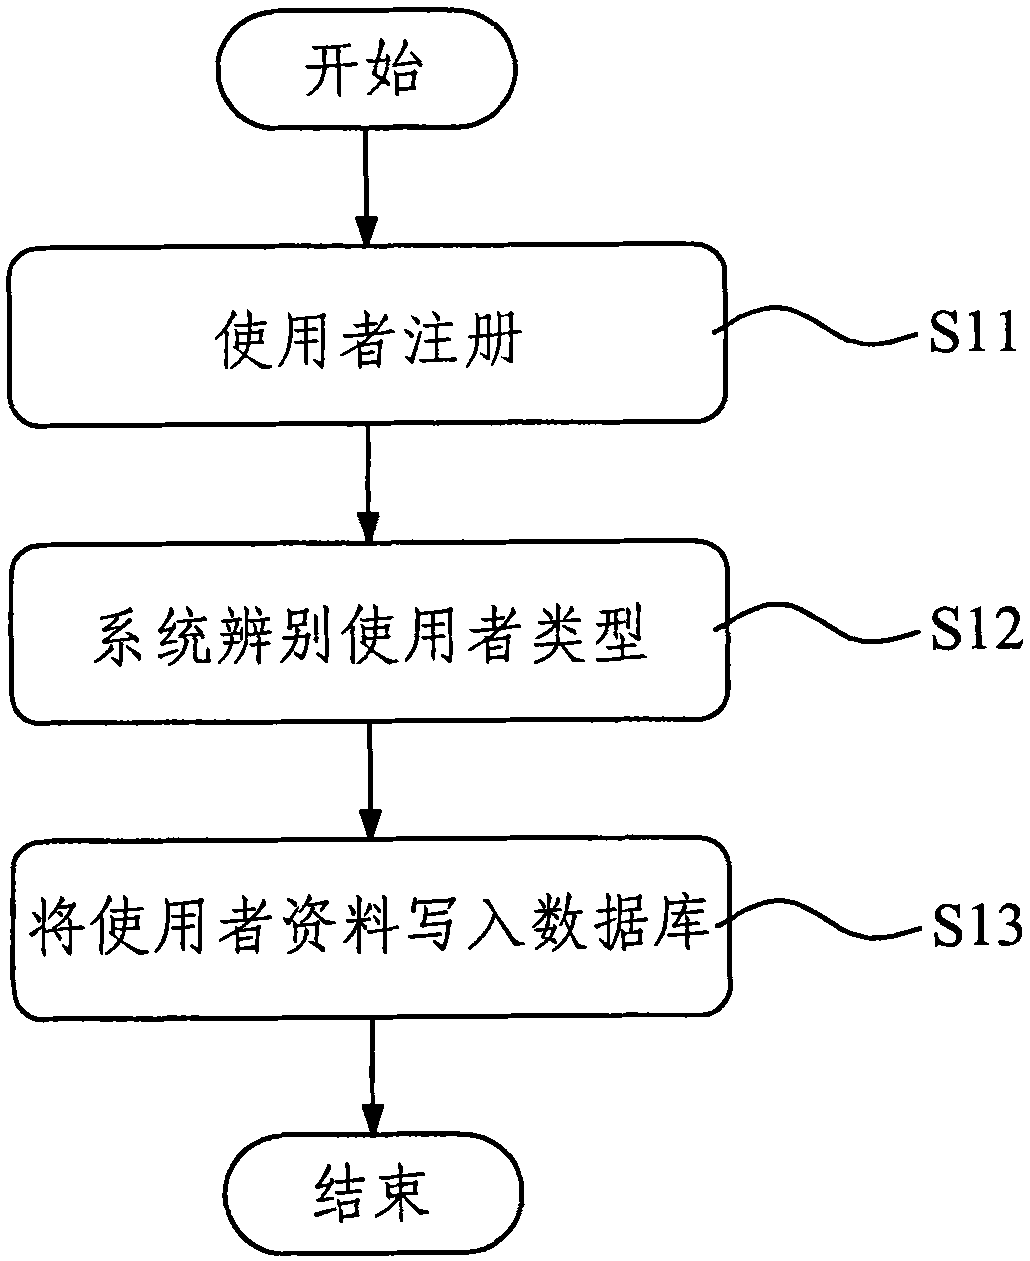 Method for instant interactive network article transaction